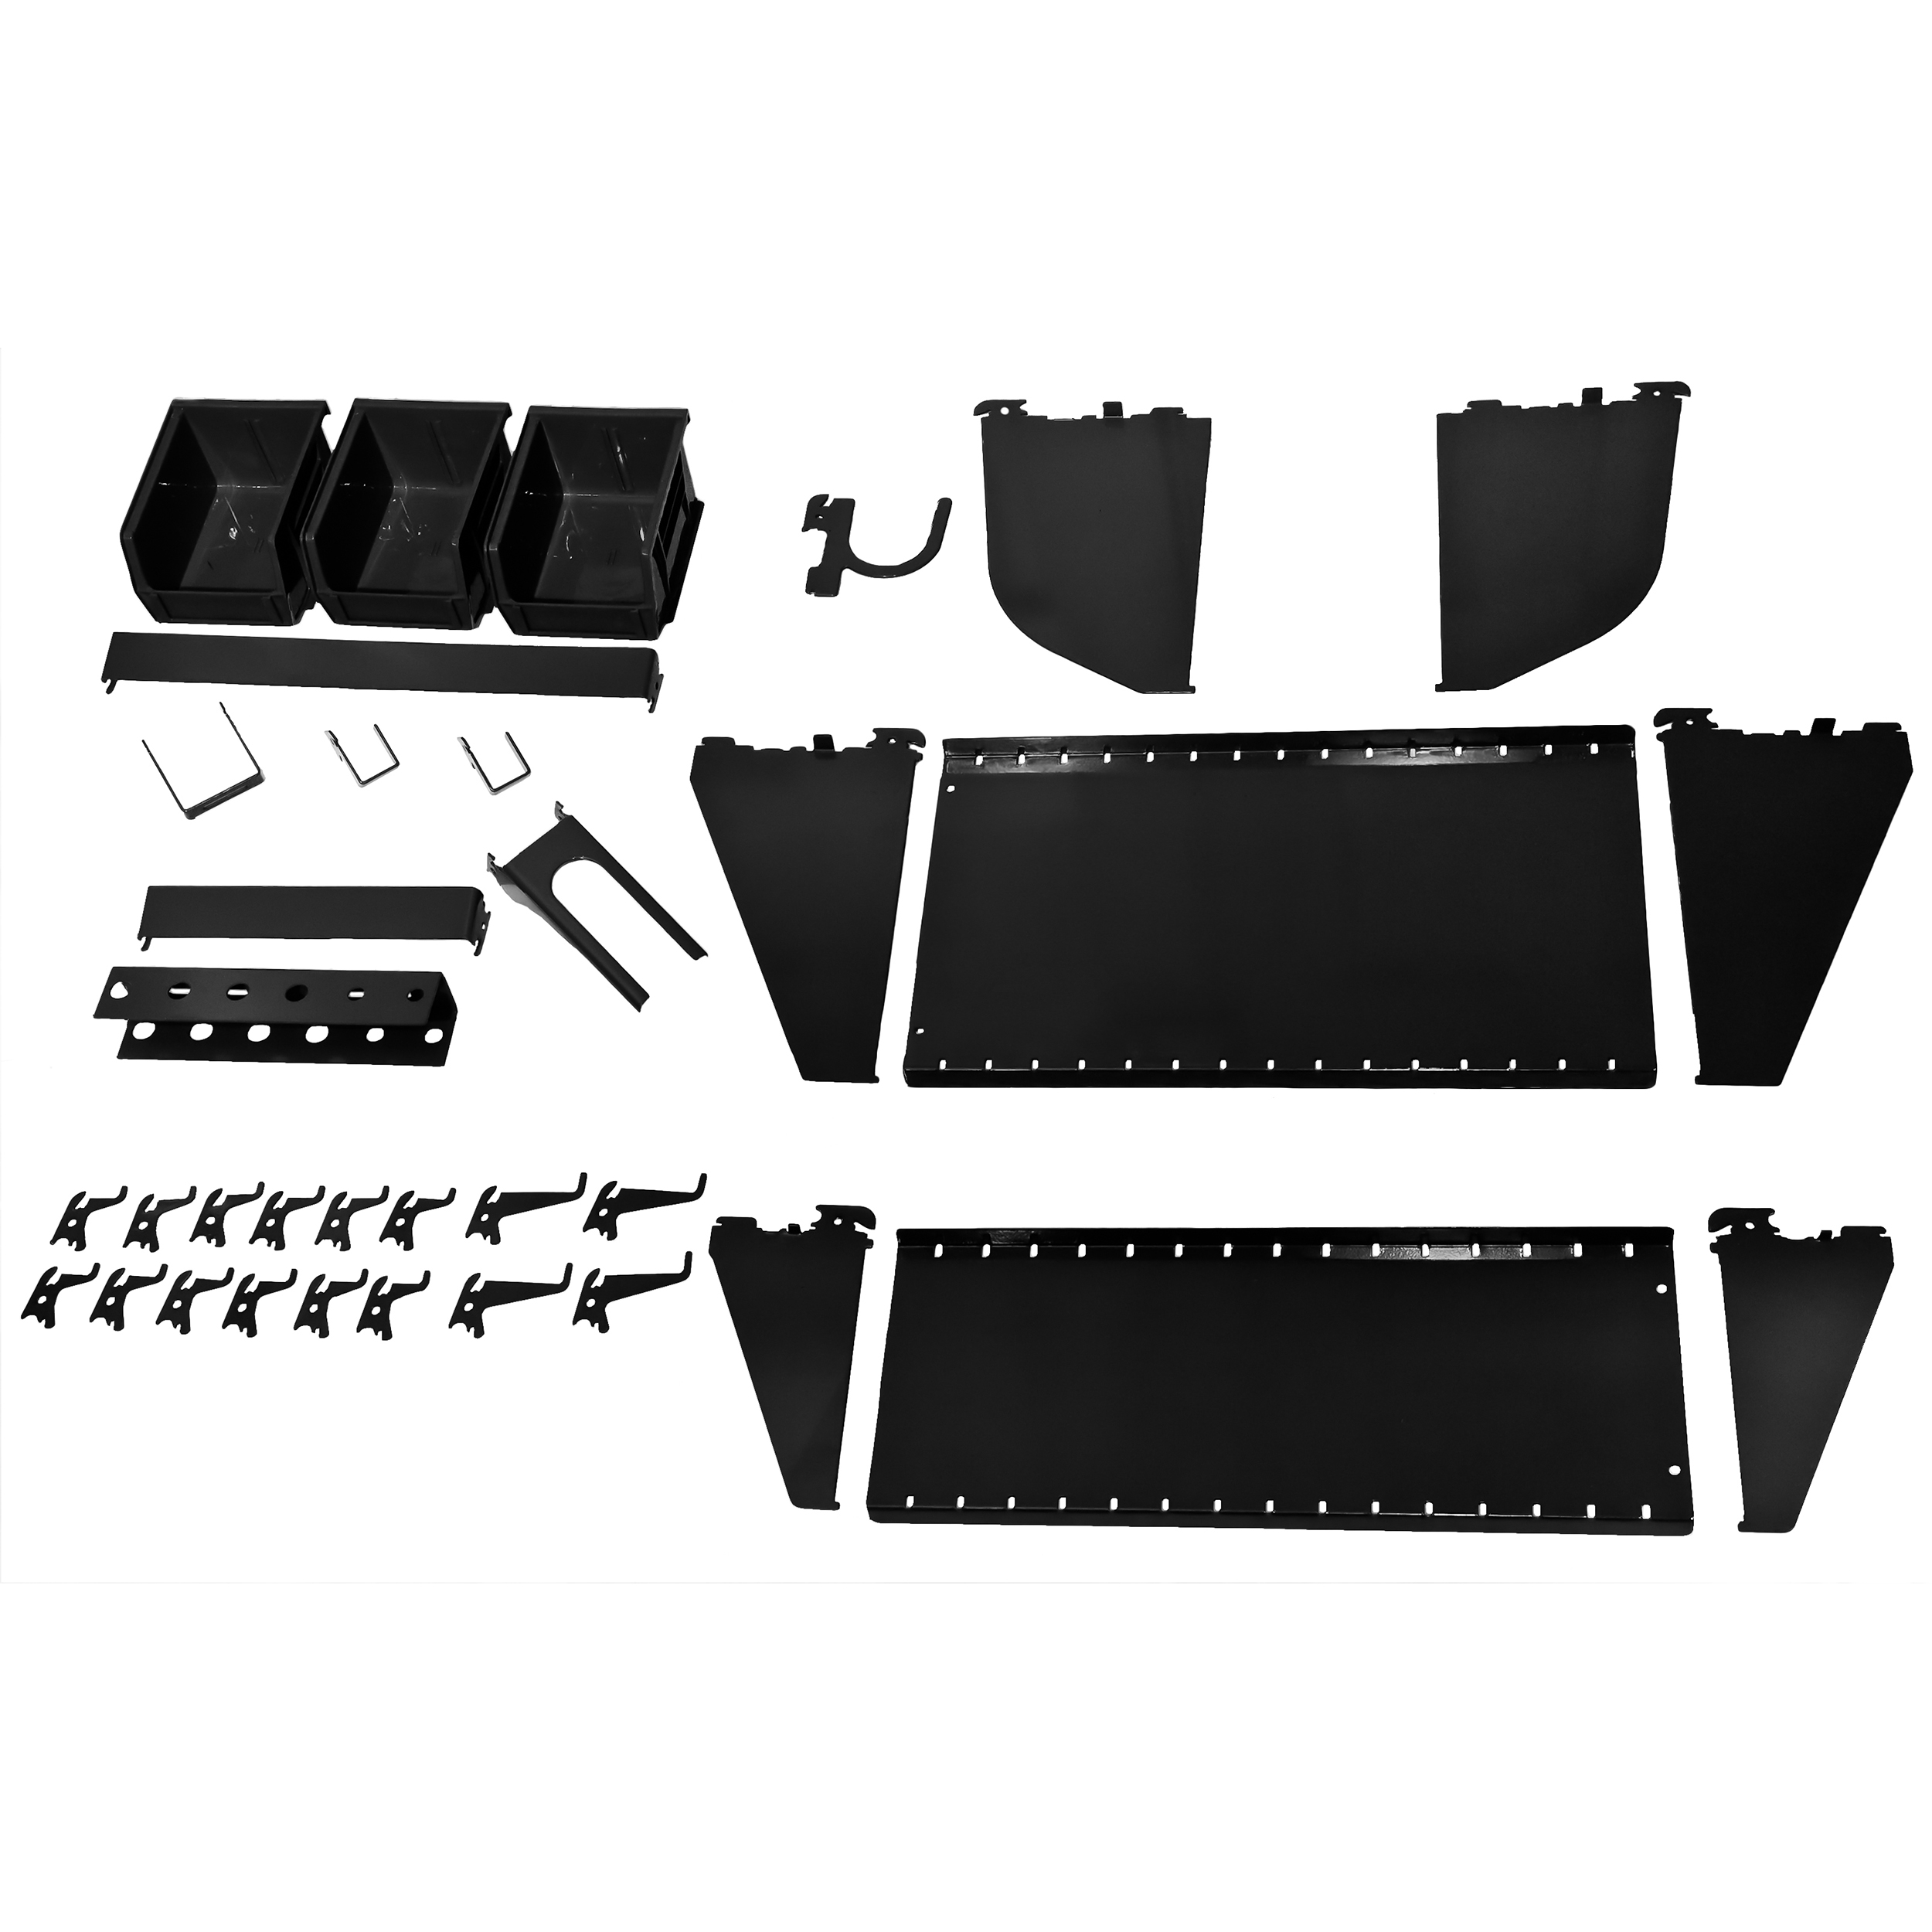 Slotted Tool Board Workstation Accessory Kit For Wall Control Pegboard, Black